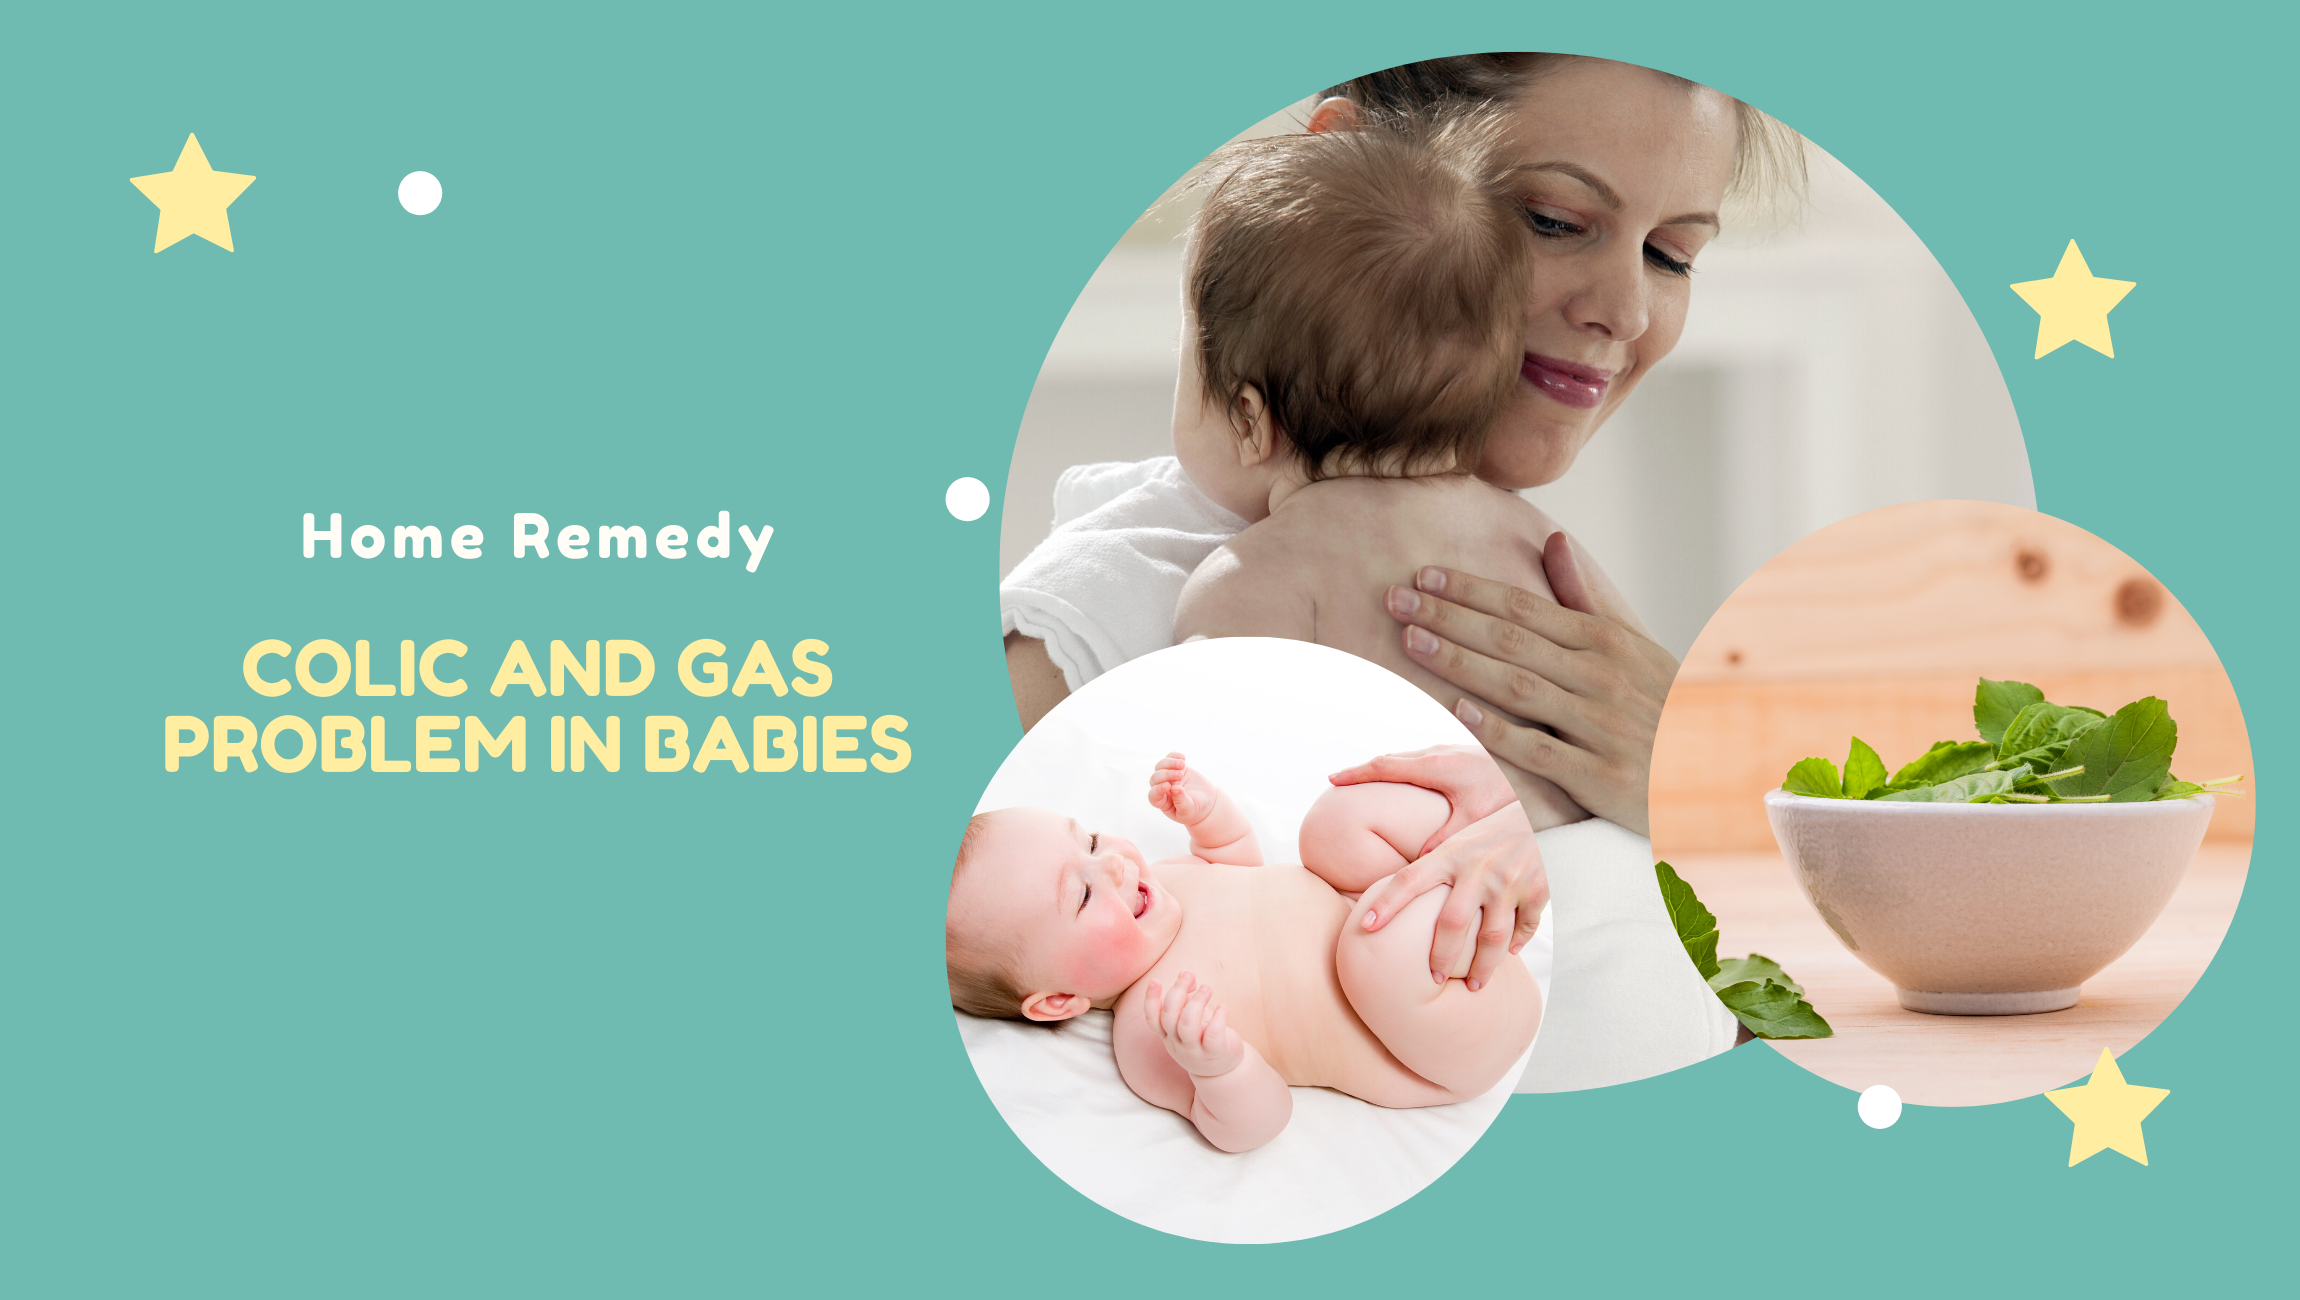 Home remedy for Colic and Gas problem in your baby